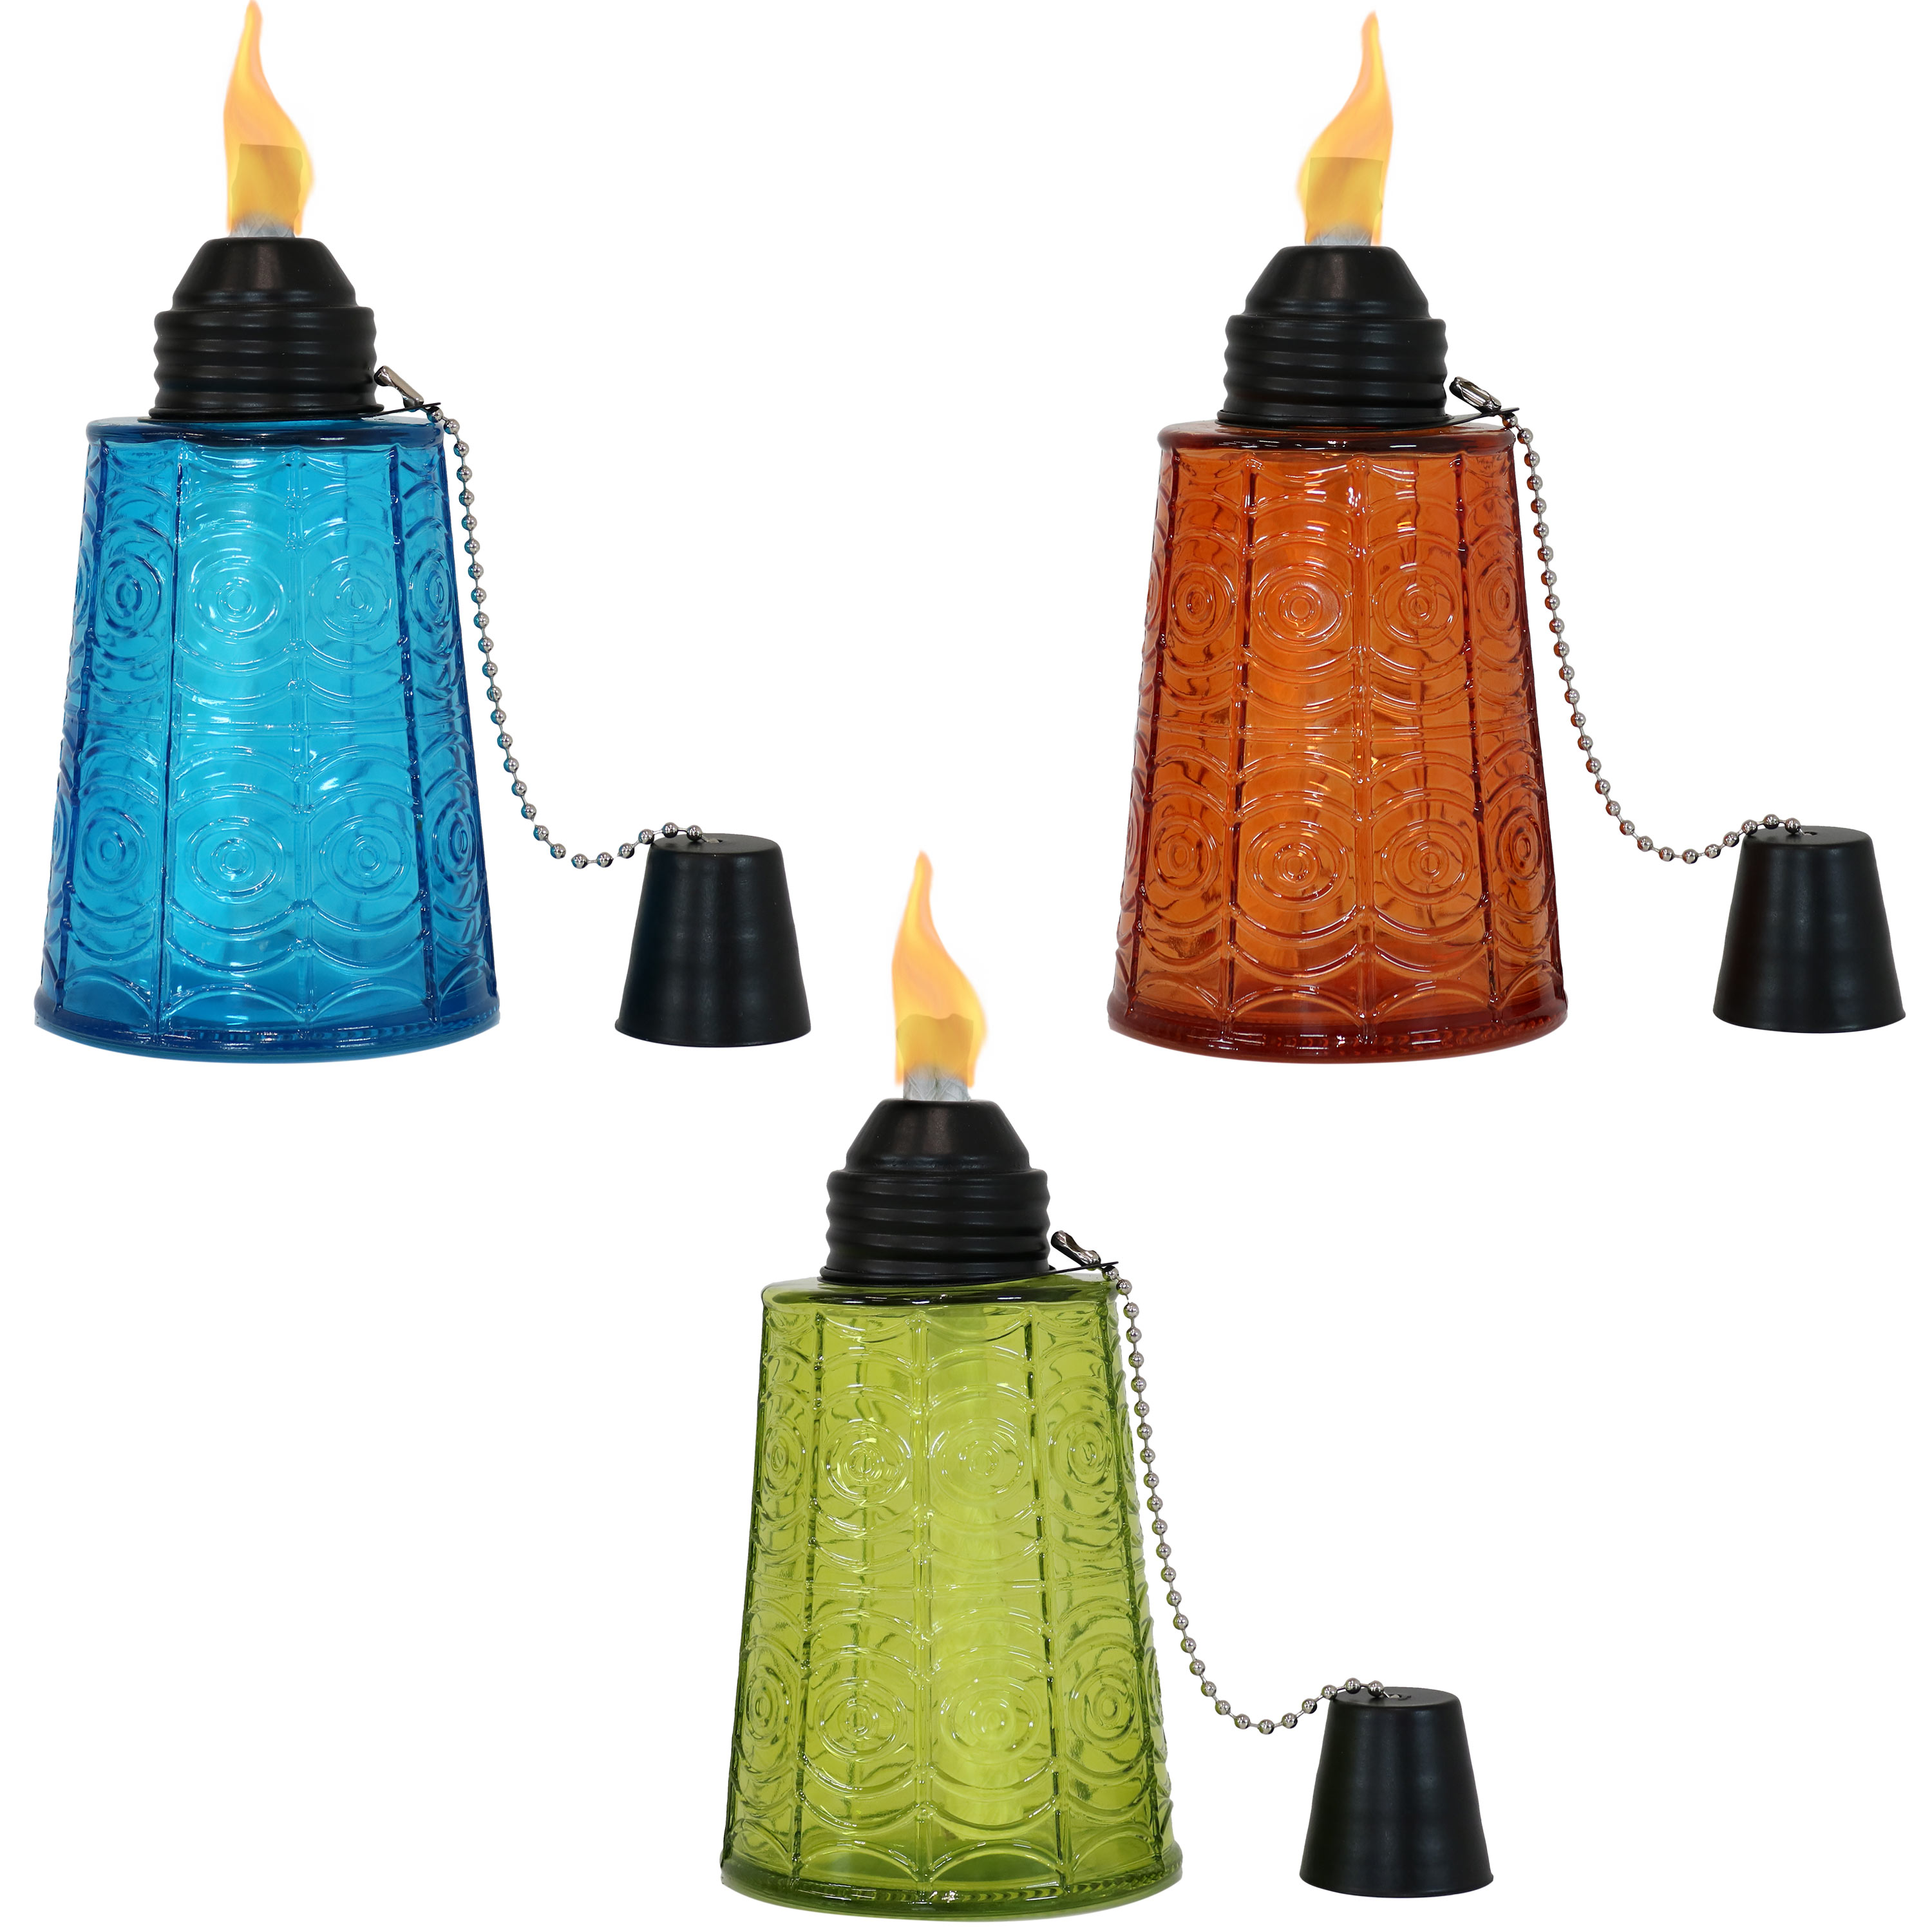 Outdoor Patio and Lawn Torch Sunnydaze Metal Tabletop Torches Set of 4 Multi-Color 